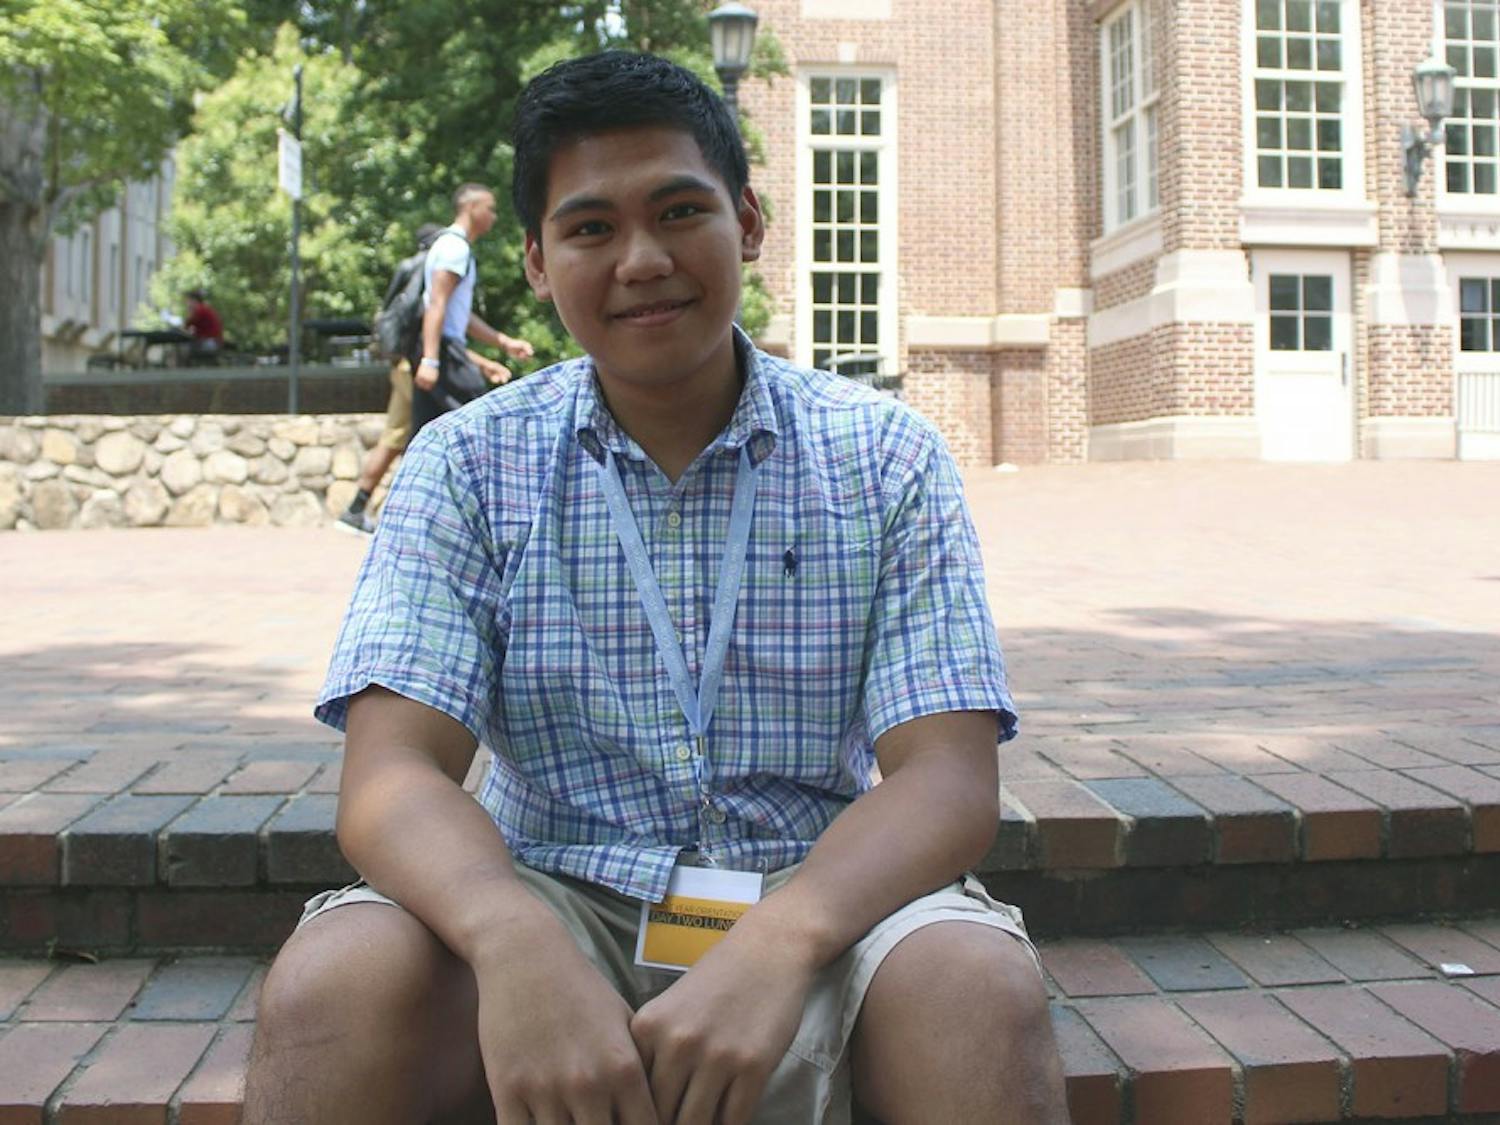 Lawrence Bacudio, a NCSSM graduate and future freshman at UNC, attends orientation despite financial issues as he awaits his green card.